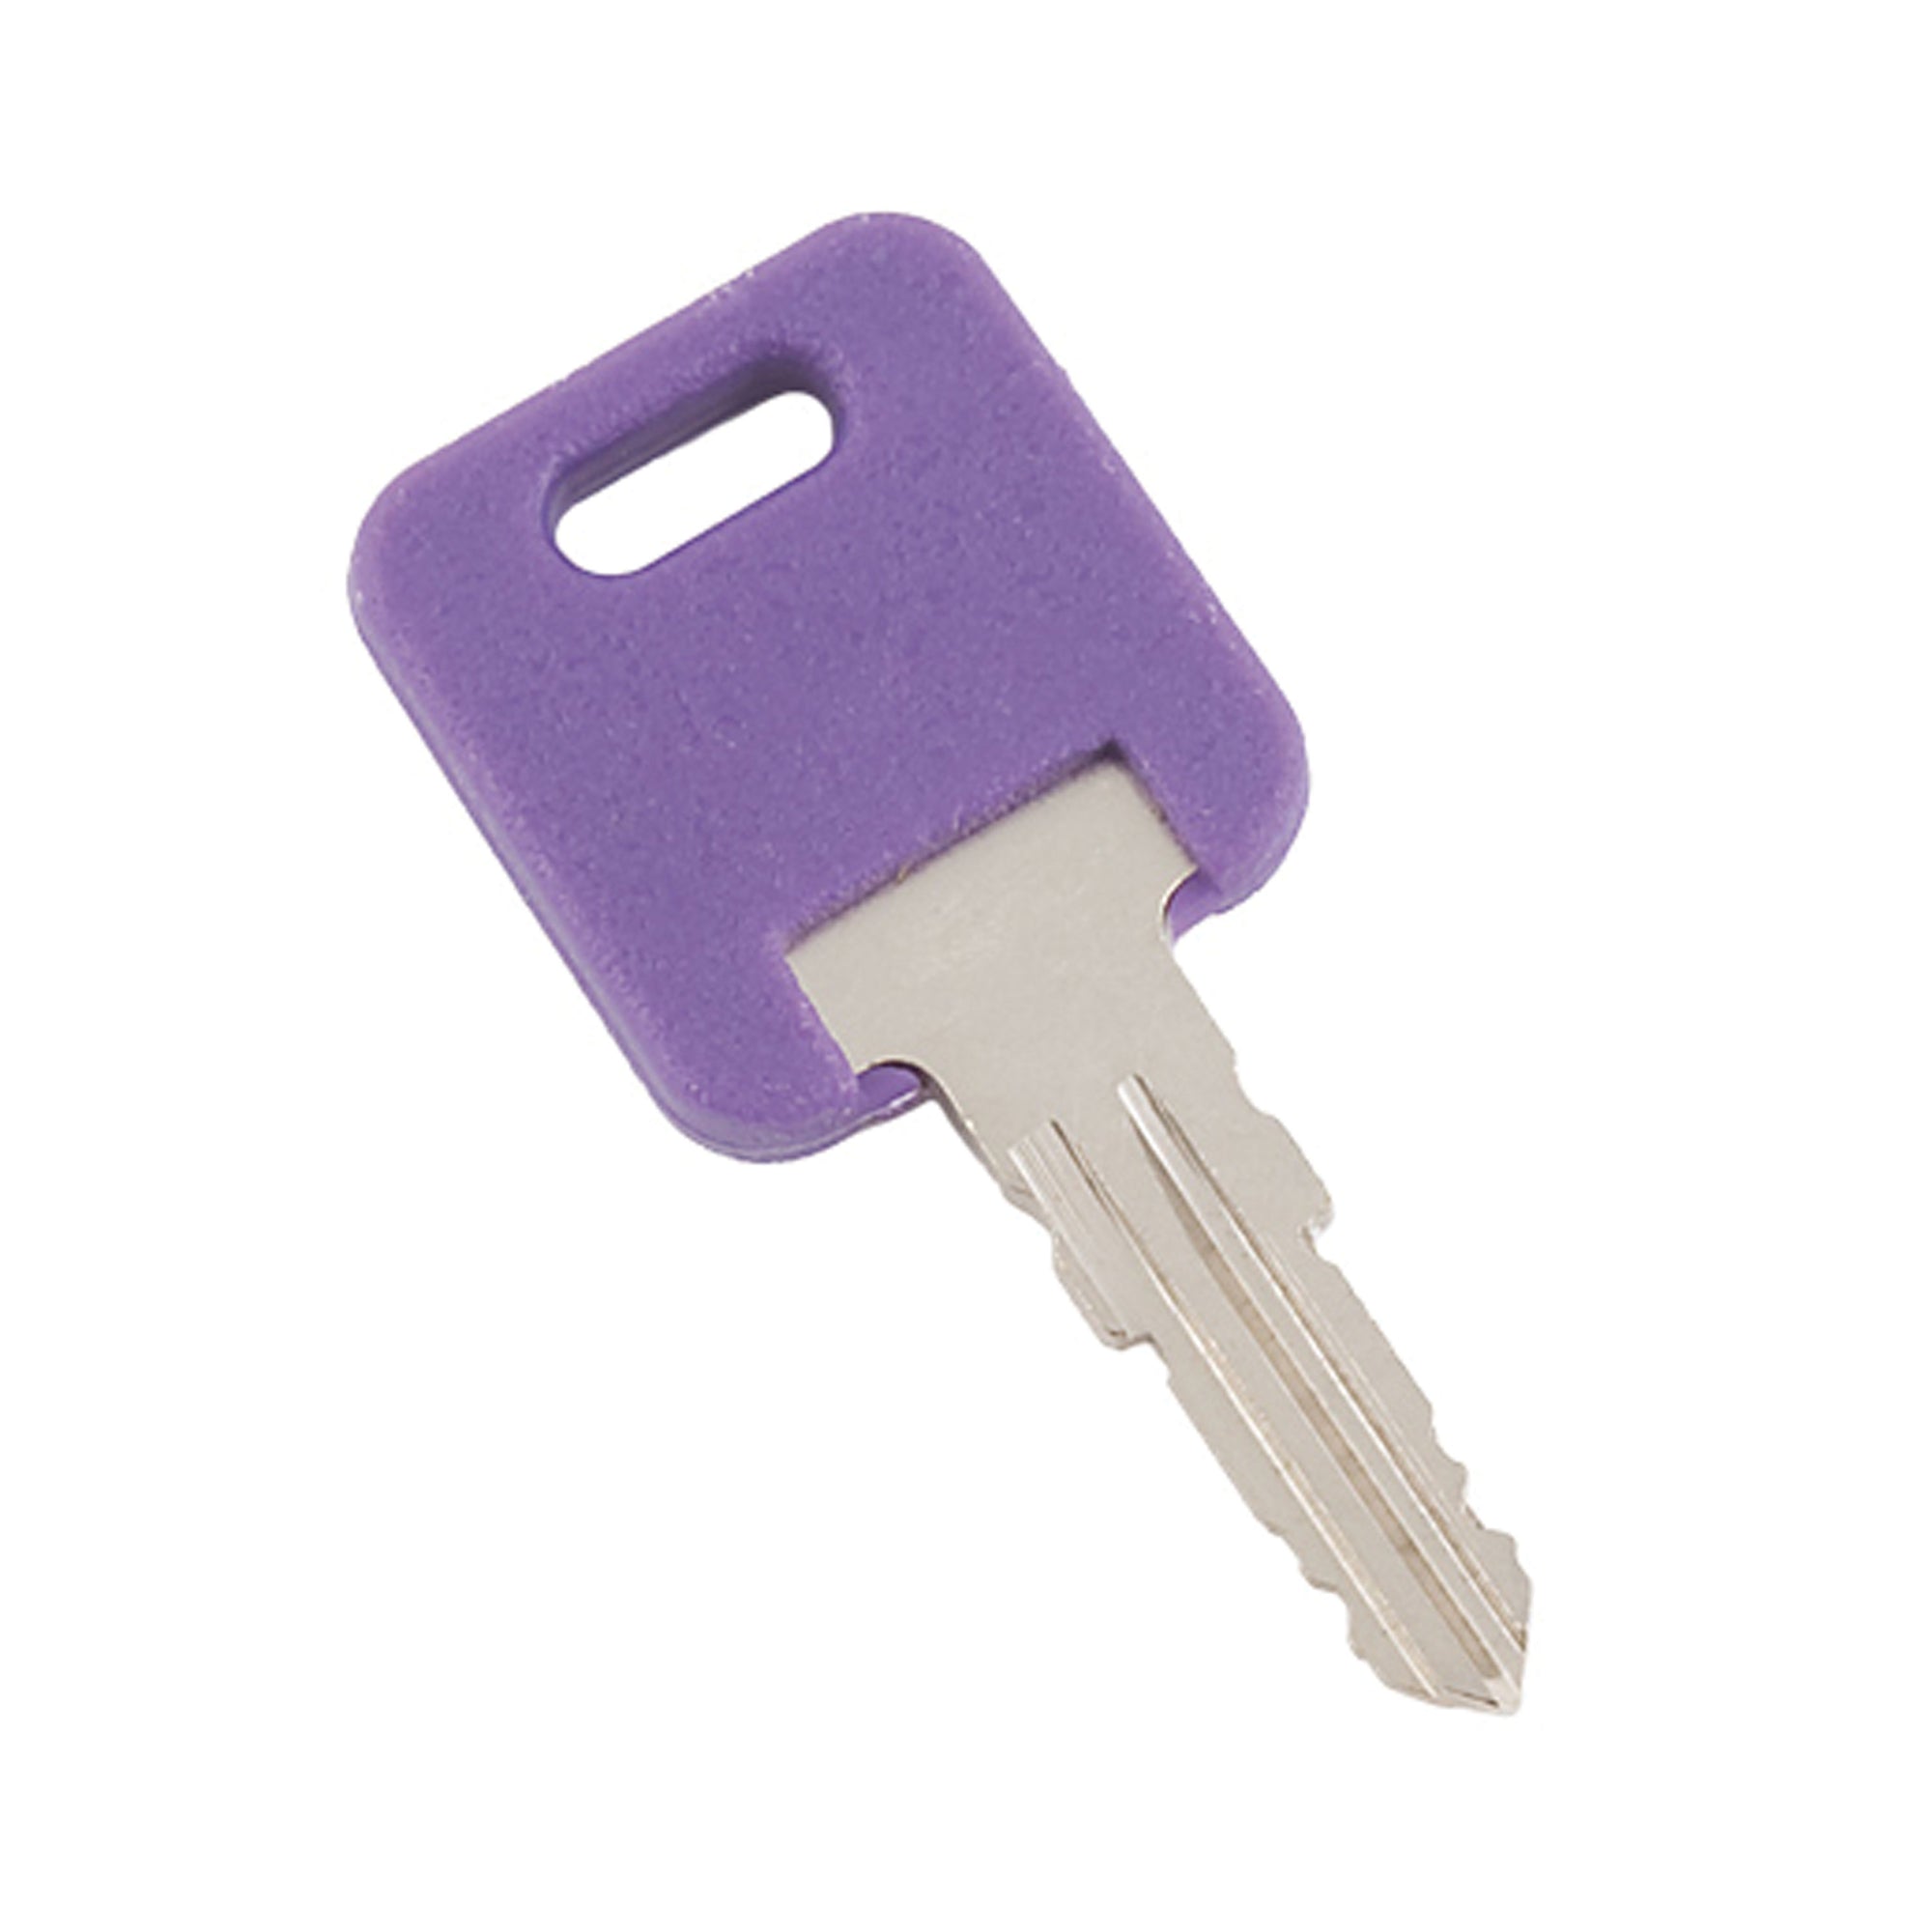 Creative Products Group G-342 Global Link G-Series Replacement Key - #342, Each